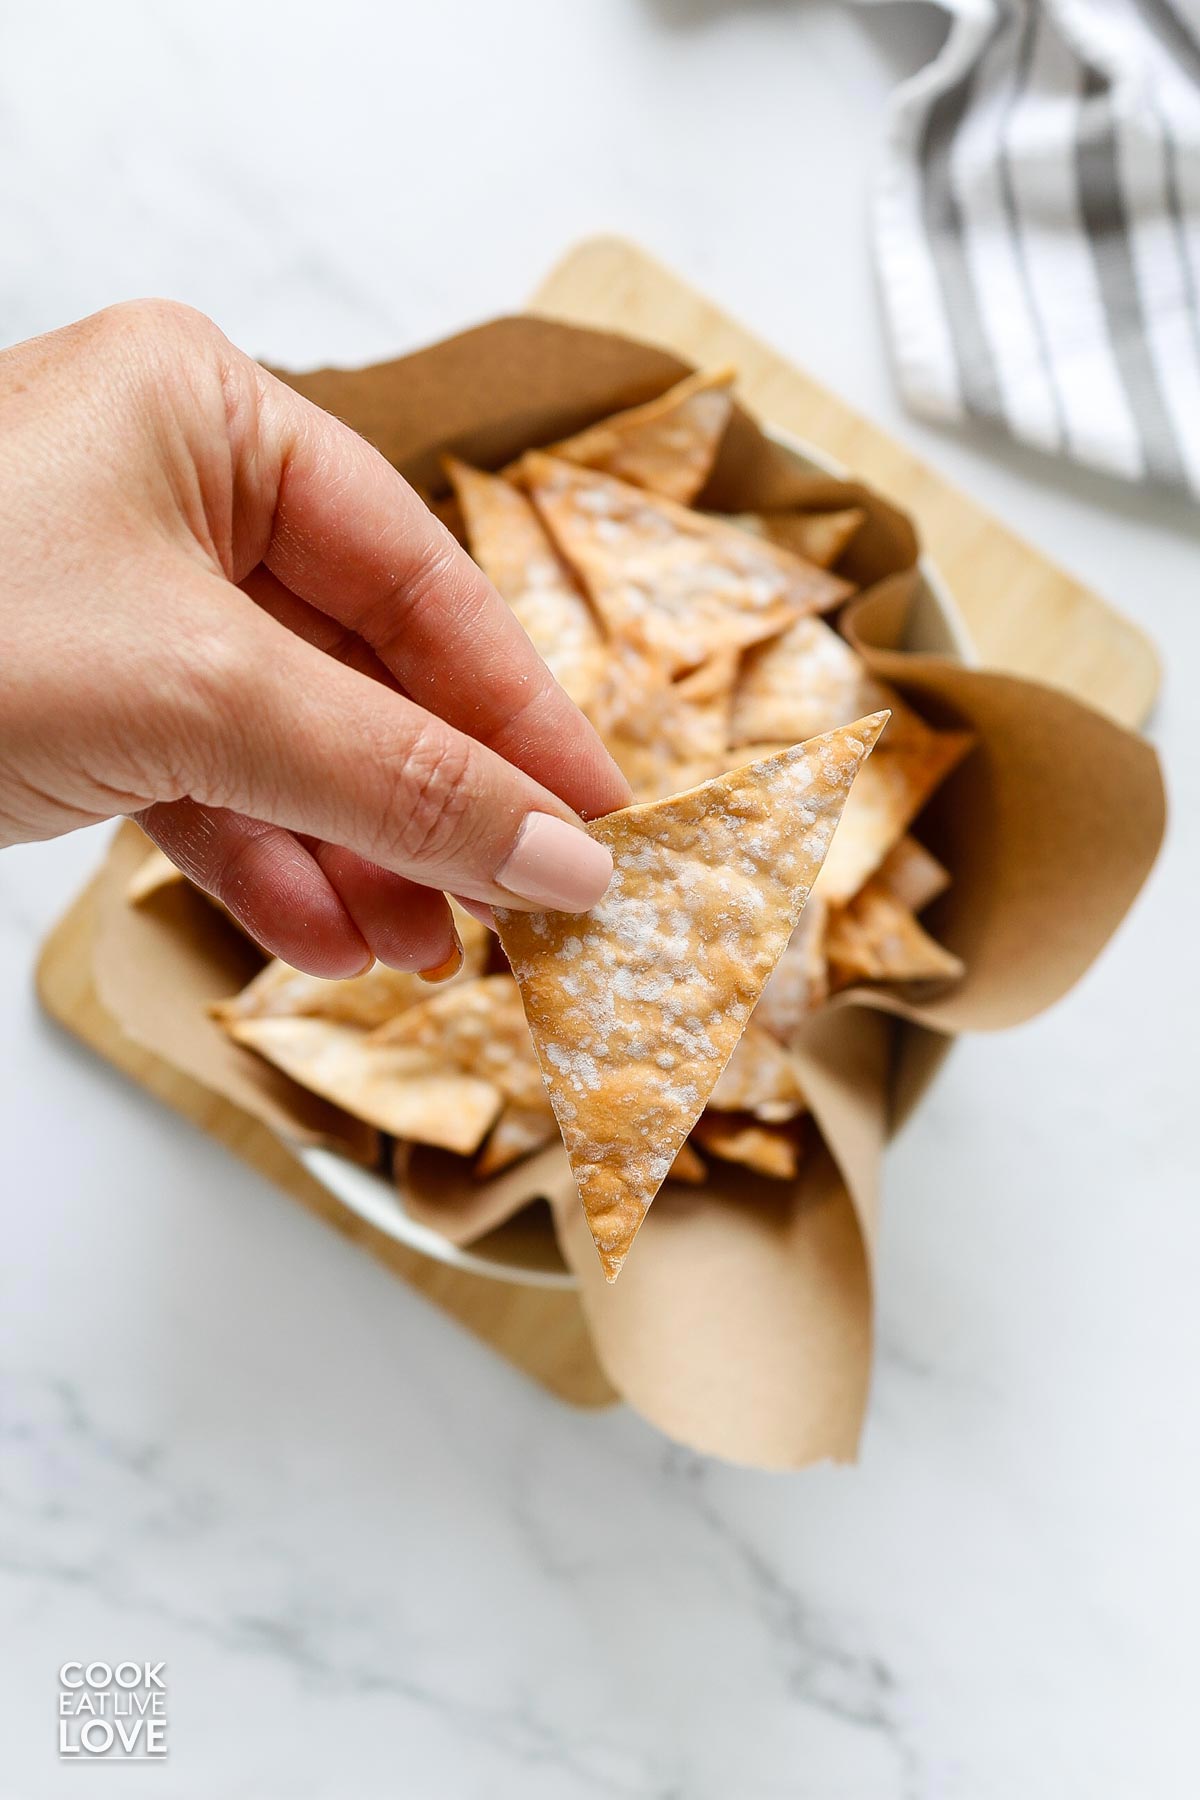 A hand picking up a crispy wonton chip from a basket.